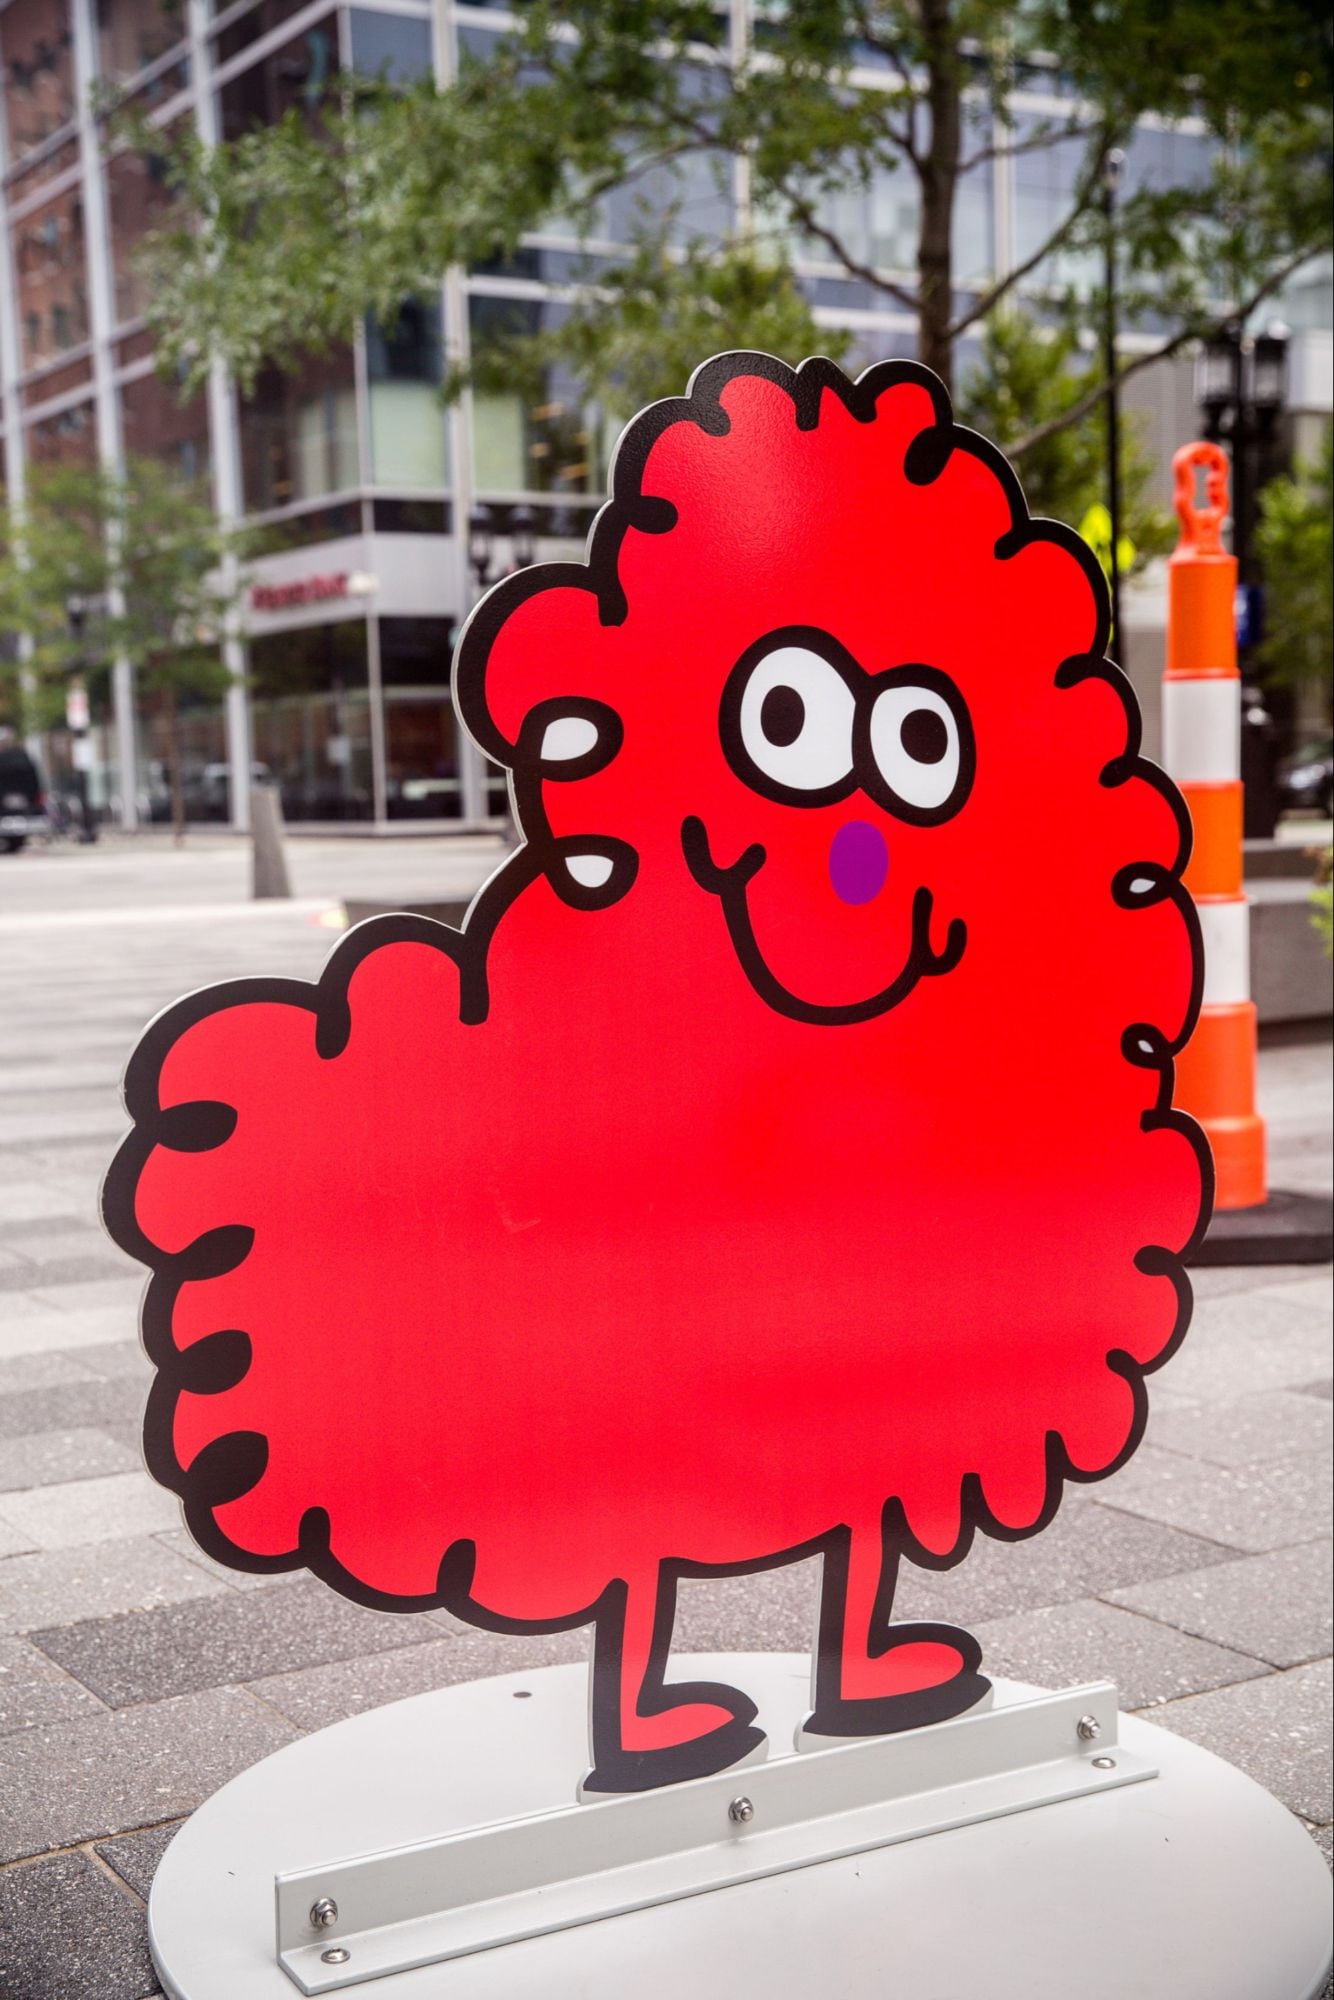 Warm-hearted doodles from artist Jon Burgerman are brought to life in the Boston Seaport's new 